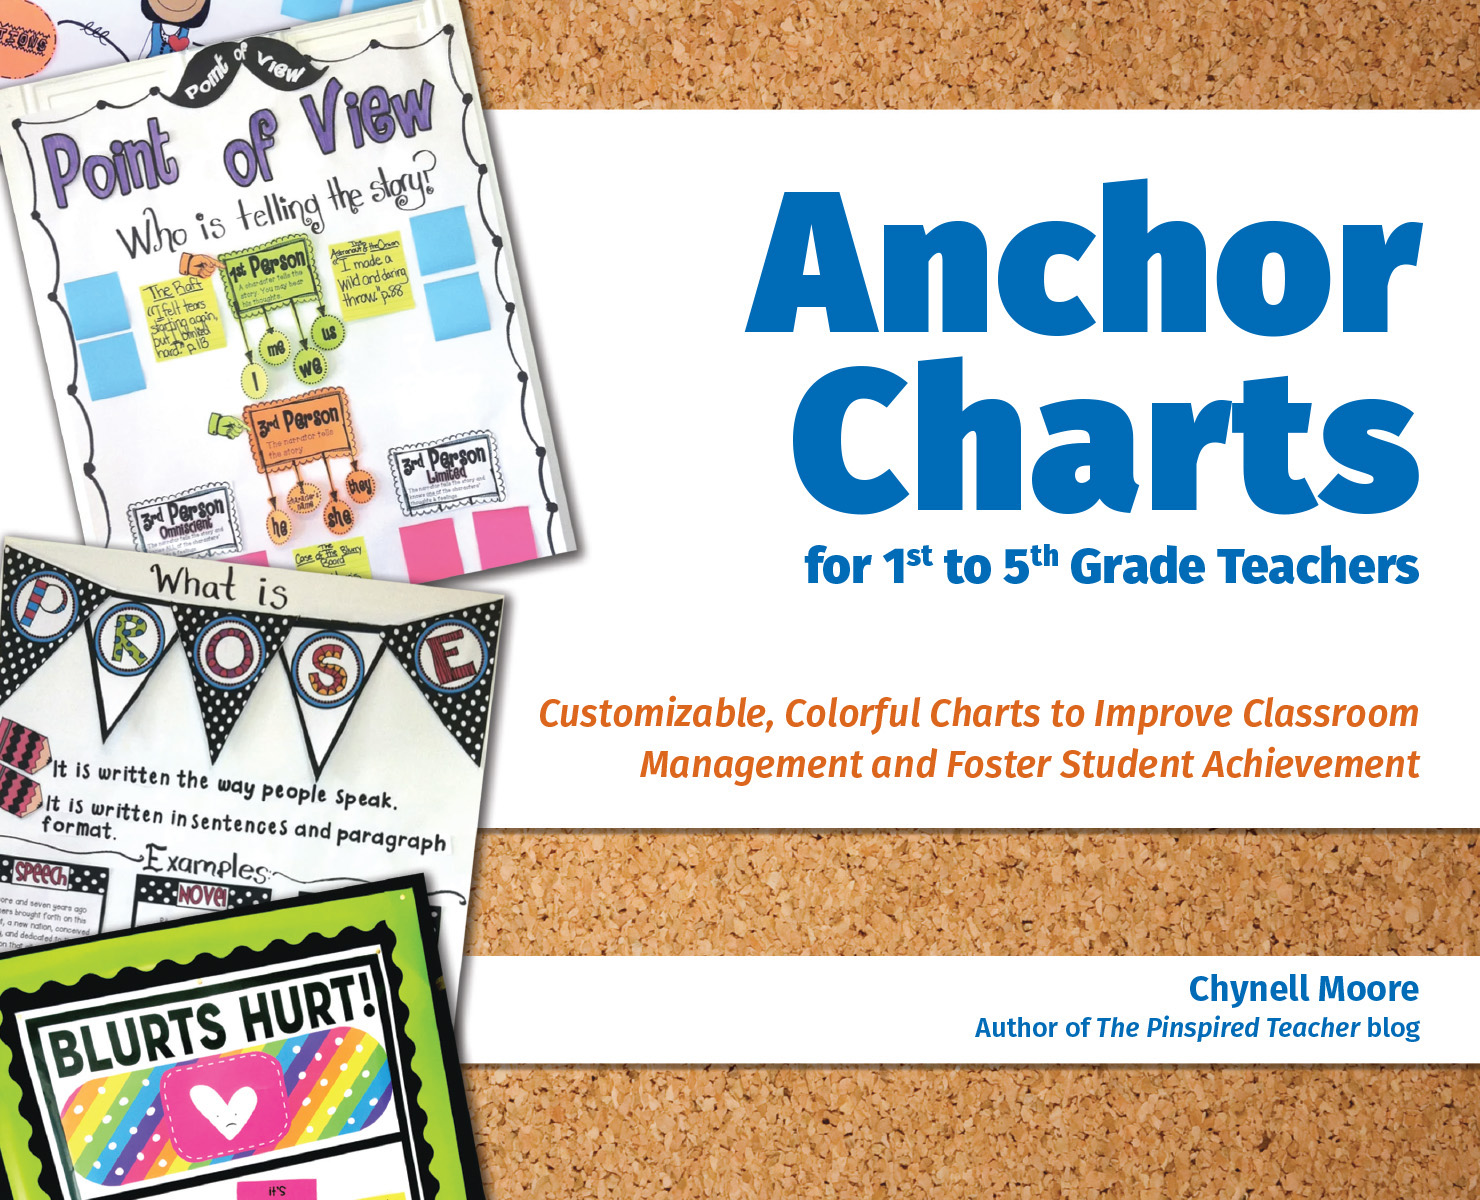 Anchor Charts for 1st to 5th Grade Teachers